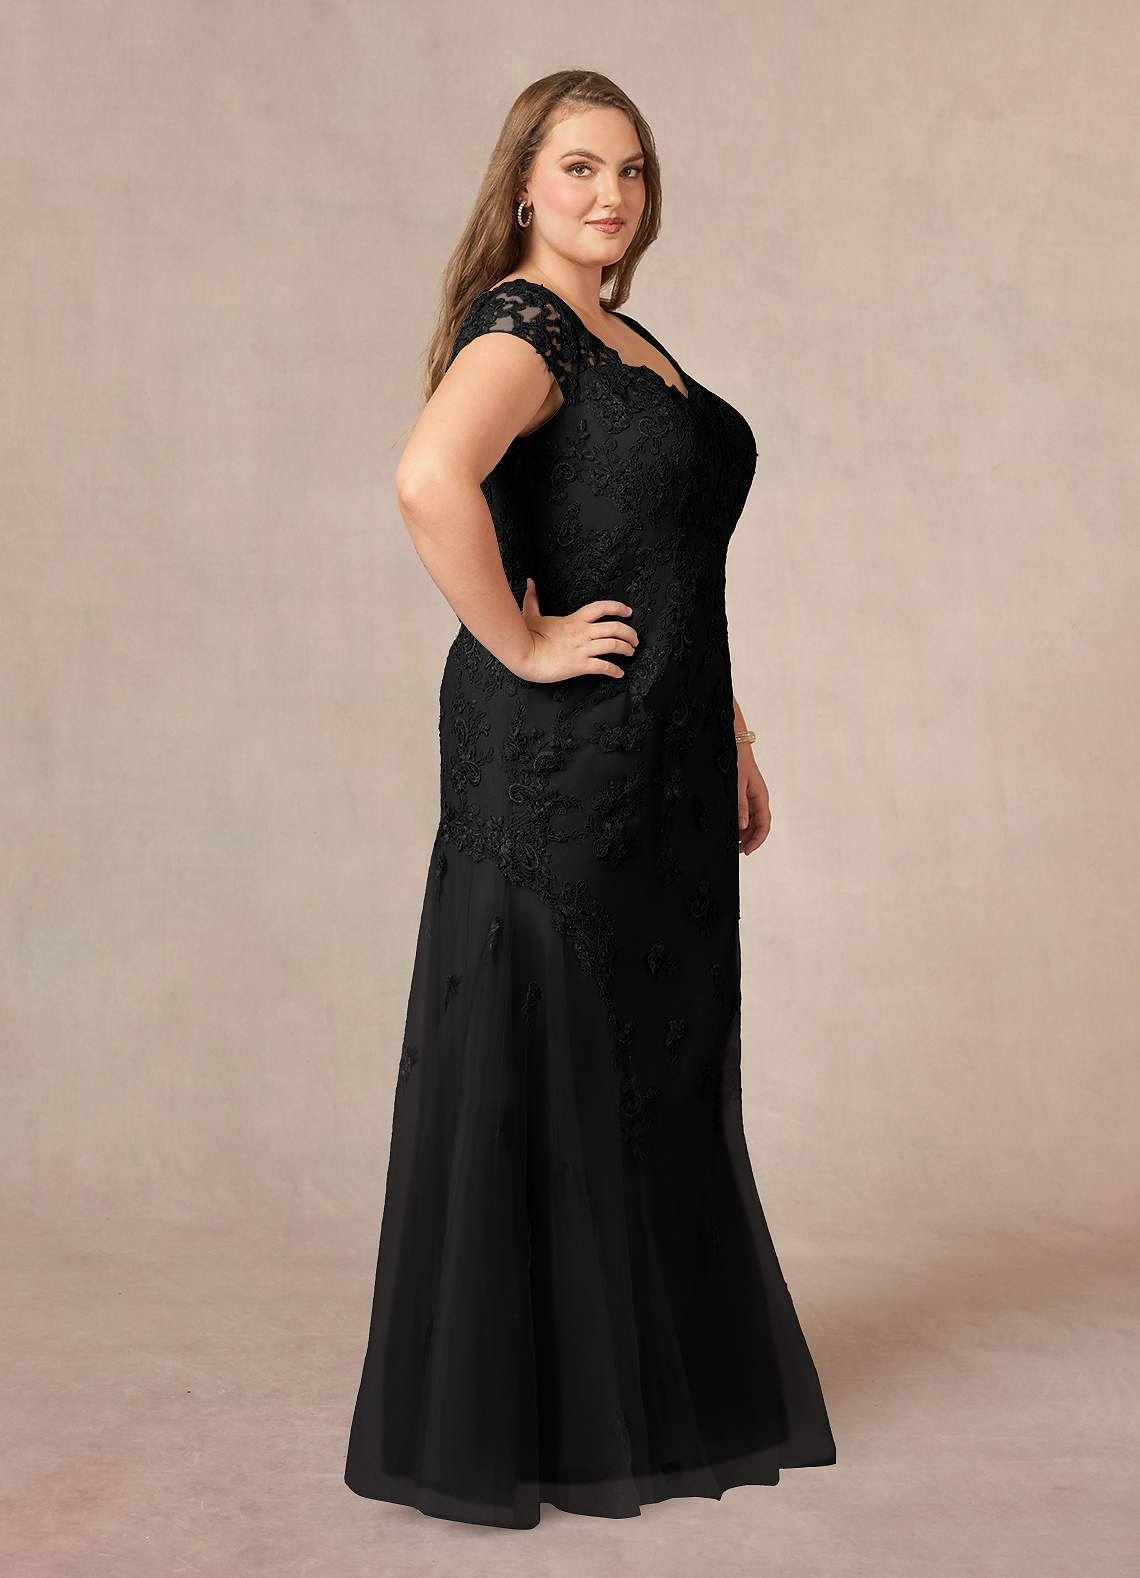 Azazie Marbella Mother of the Bride Dresses Mermaid Queen Anne Sequins Lace Floor-Length Dress image1